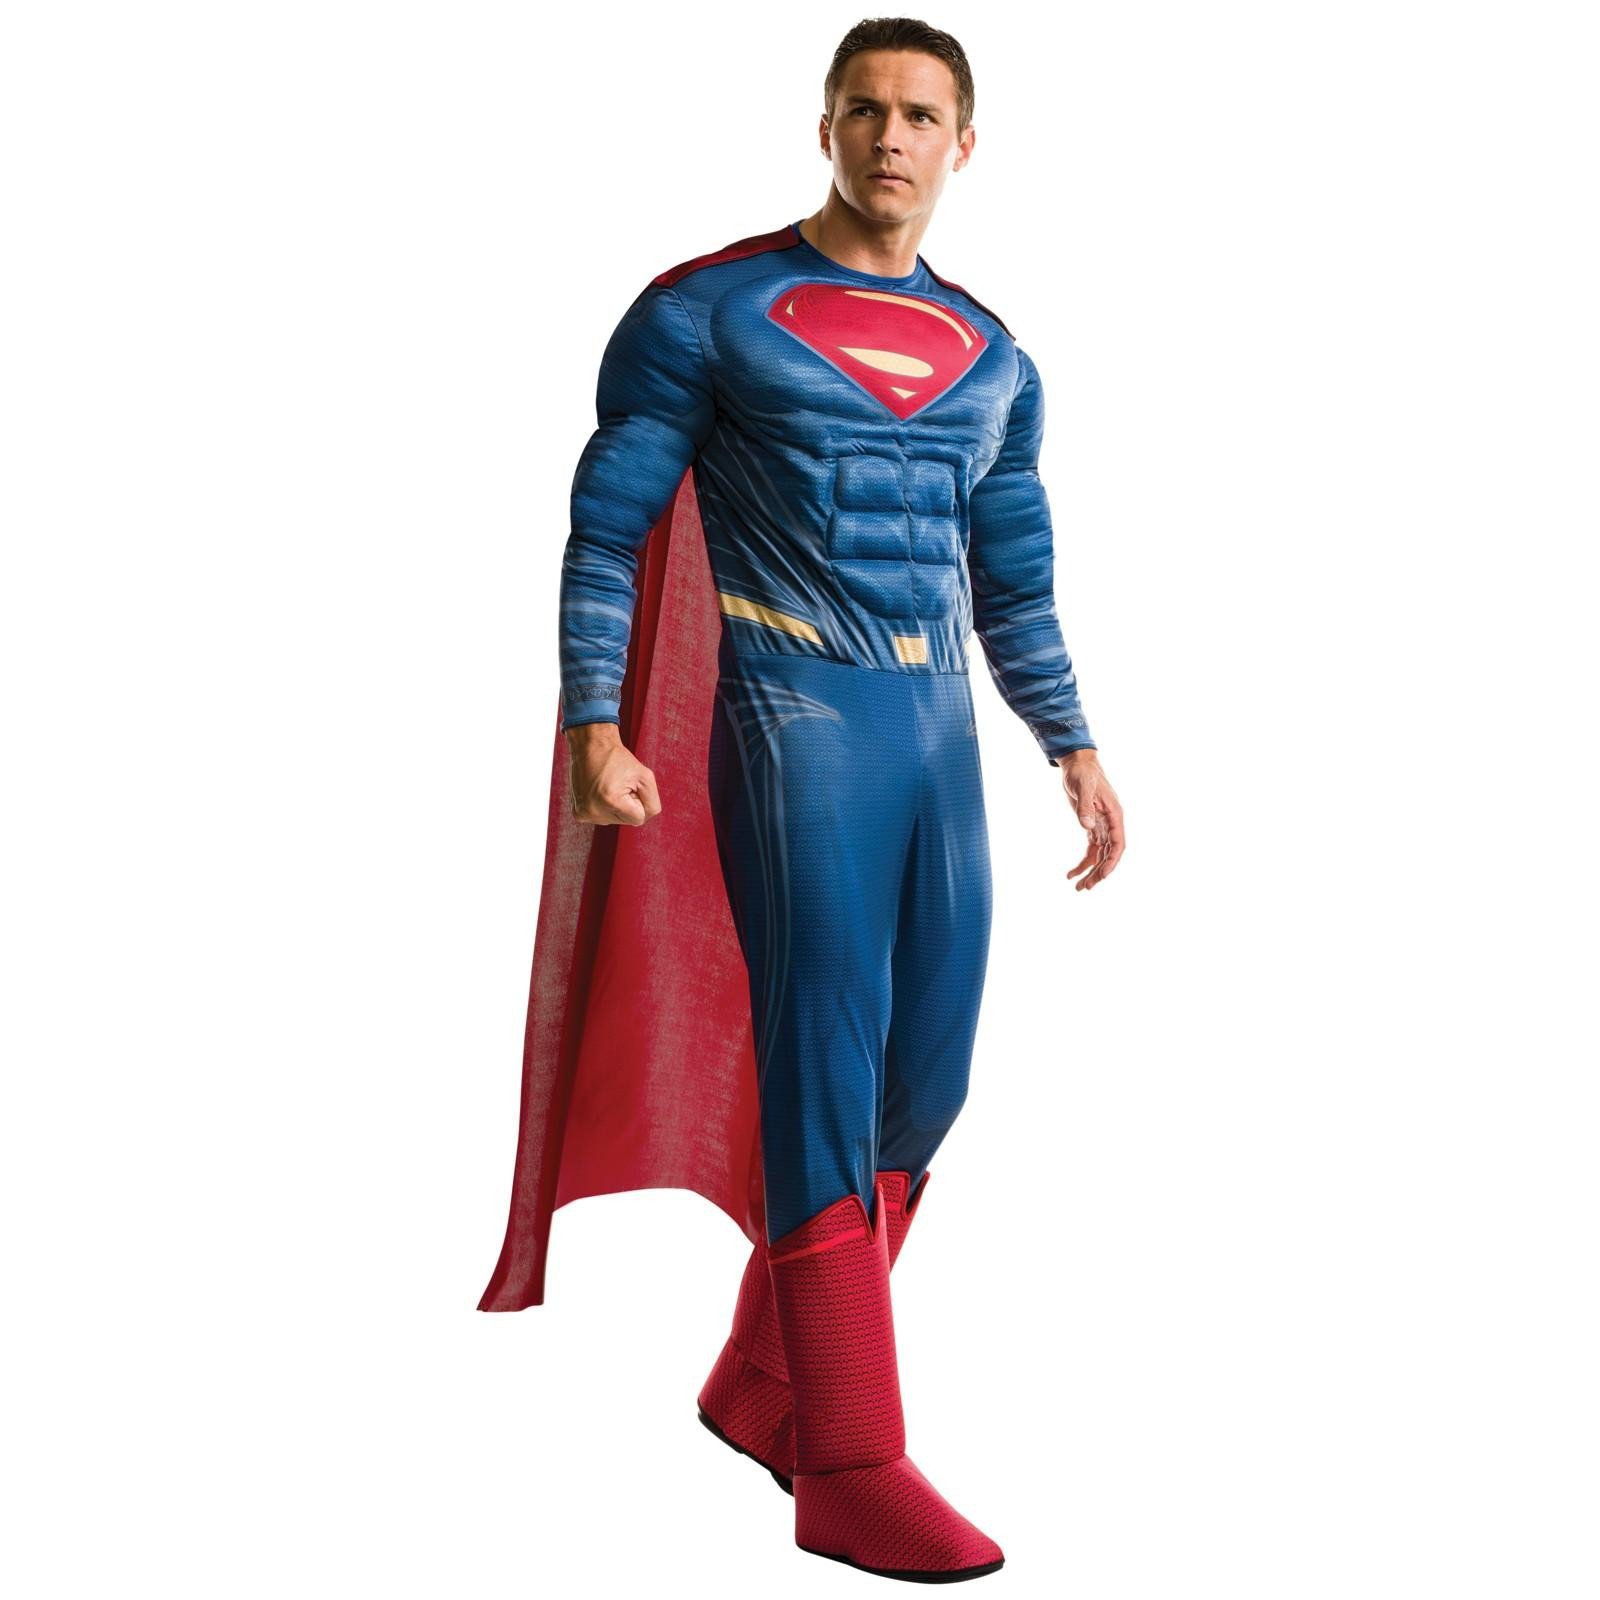 Justice League Superman Returns Deluxe Muscle Chest Boy's Halloween ...